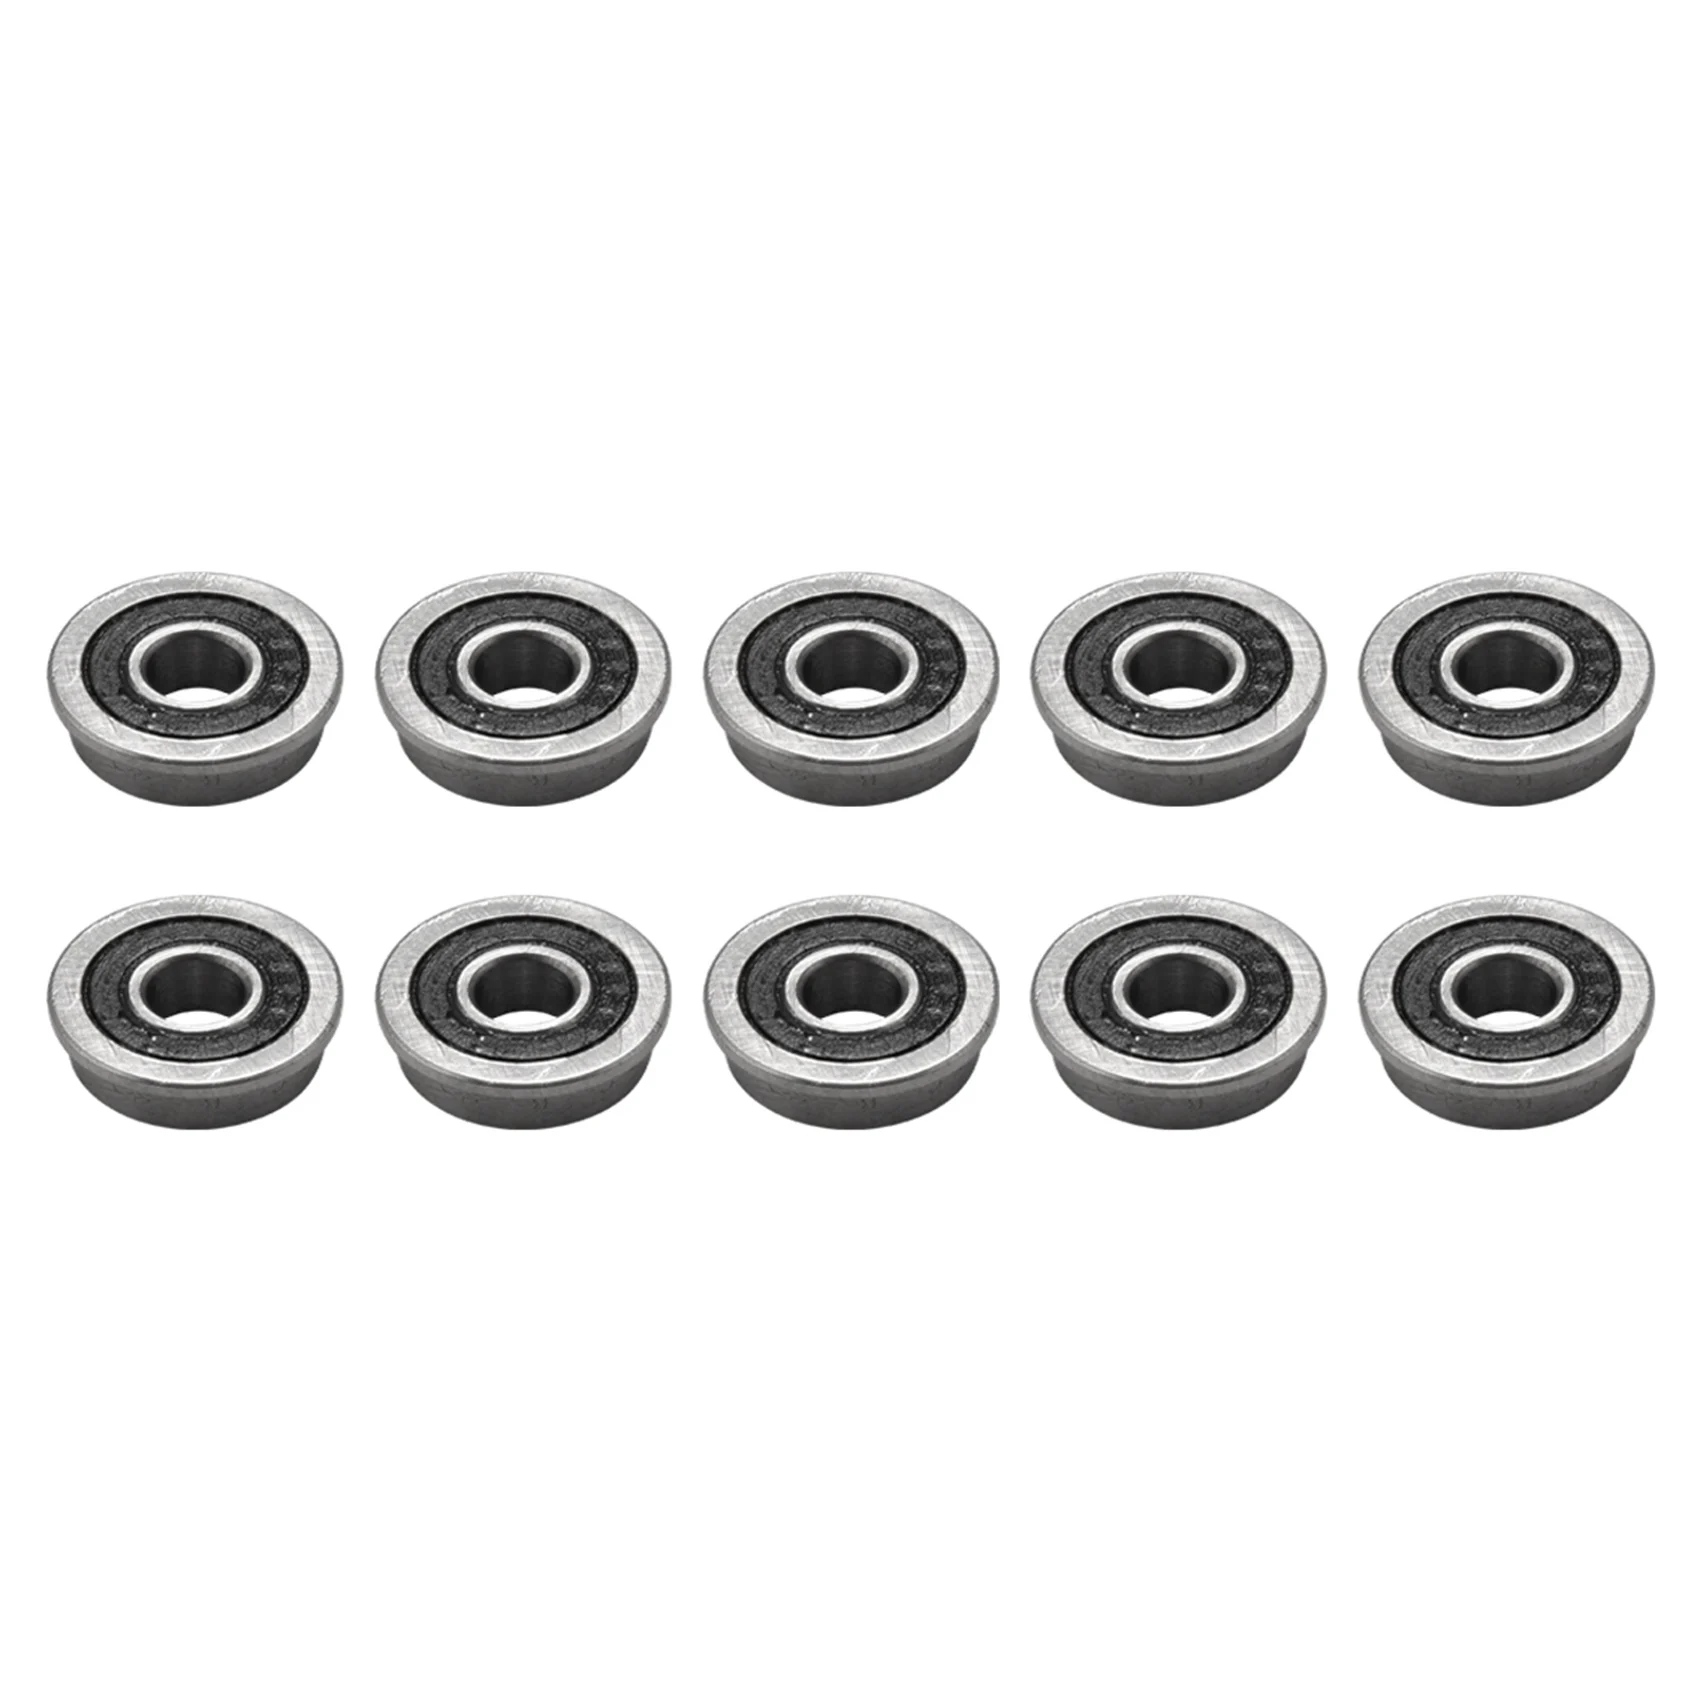 

10Pcs F695-2RS Bearing 5X13X4mm Flanged Miniature Deep Groove Ball Bearings F695RS for VORON Mobius 2/3 3D Printer